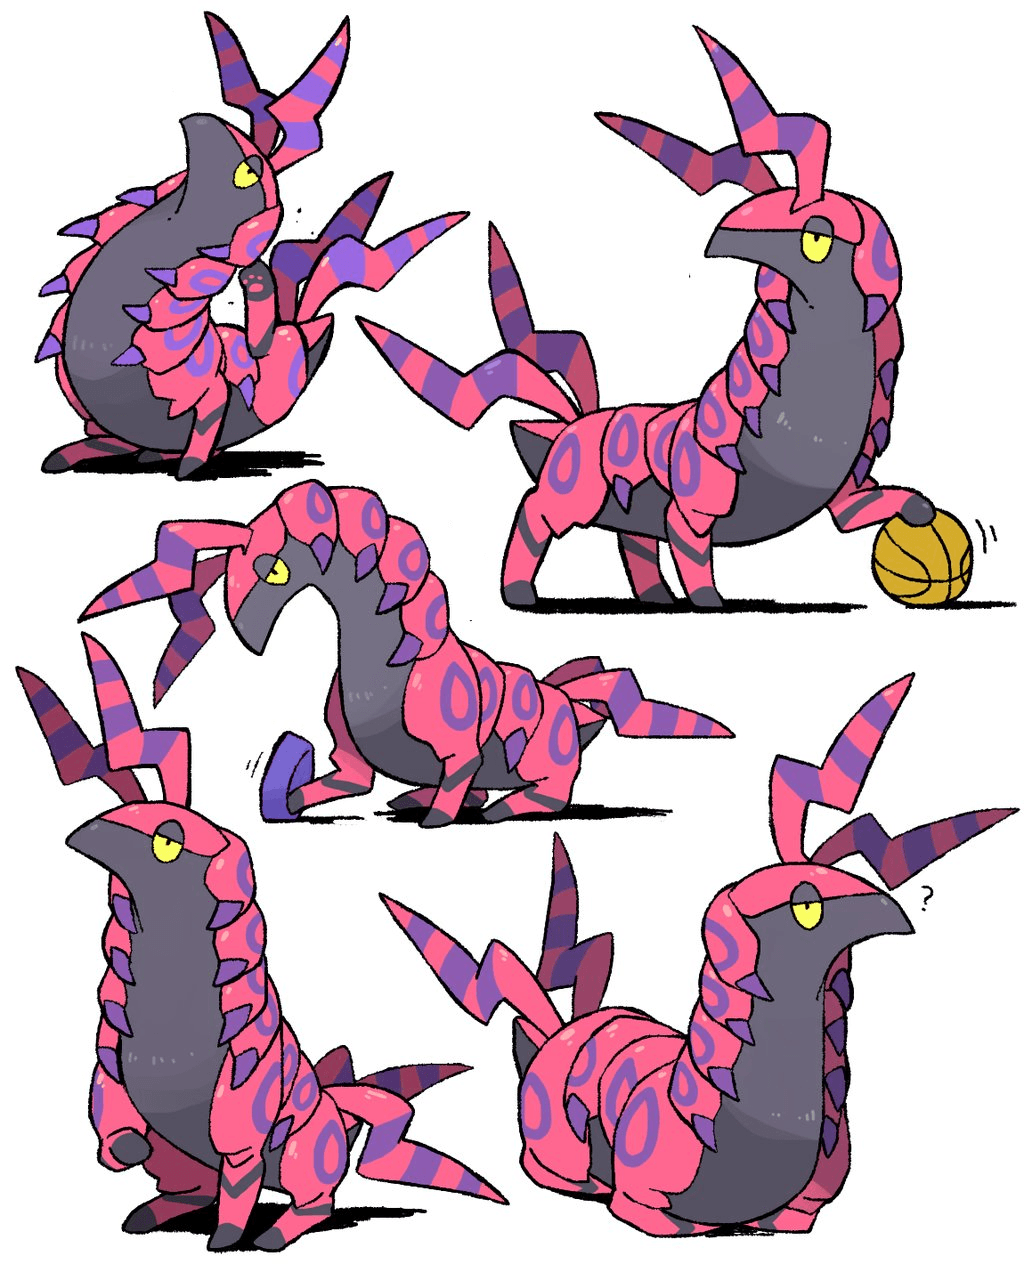 Scolipede is an enemy bulldozer who also happens to be an adorable